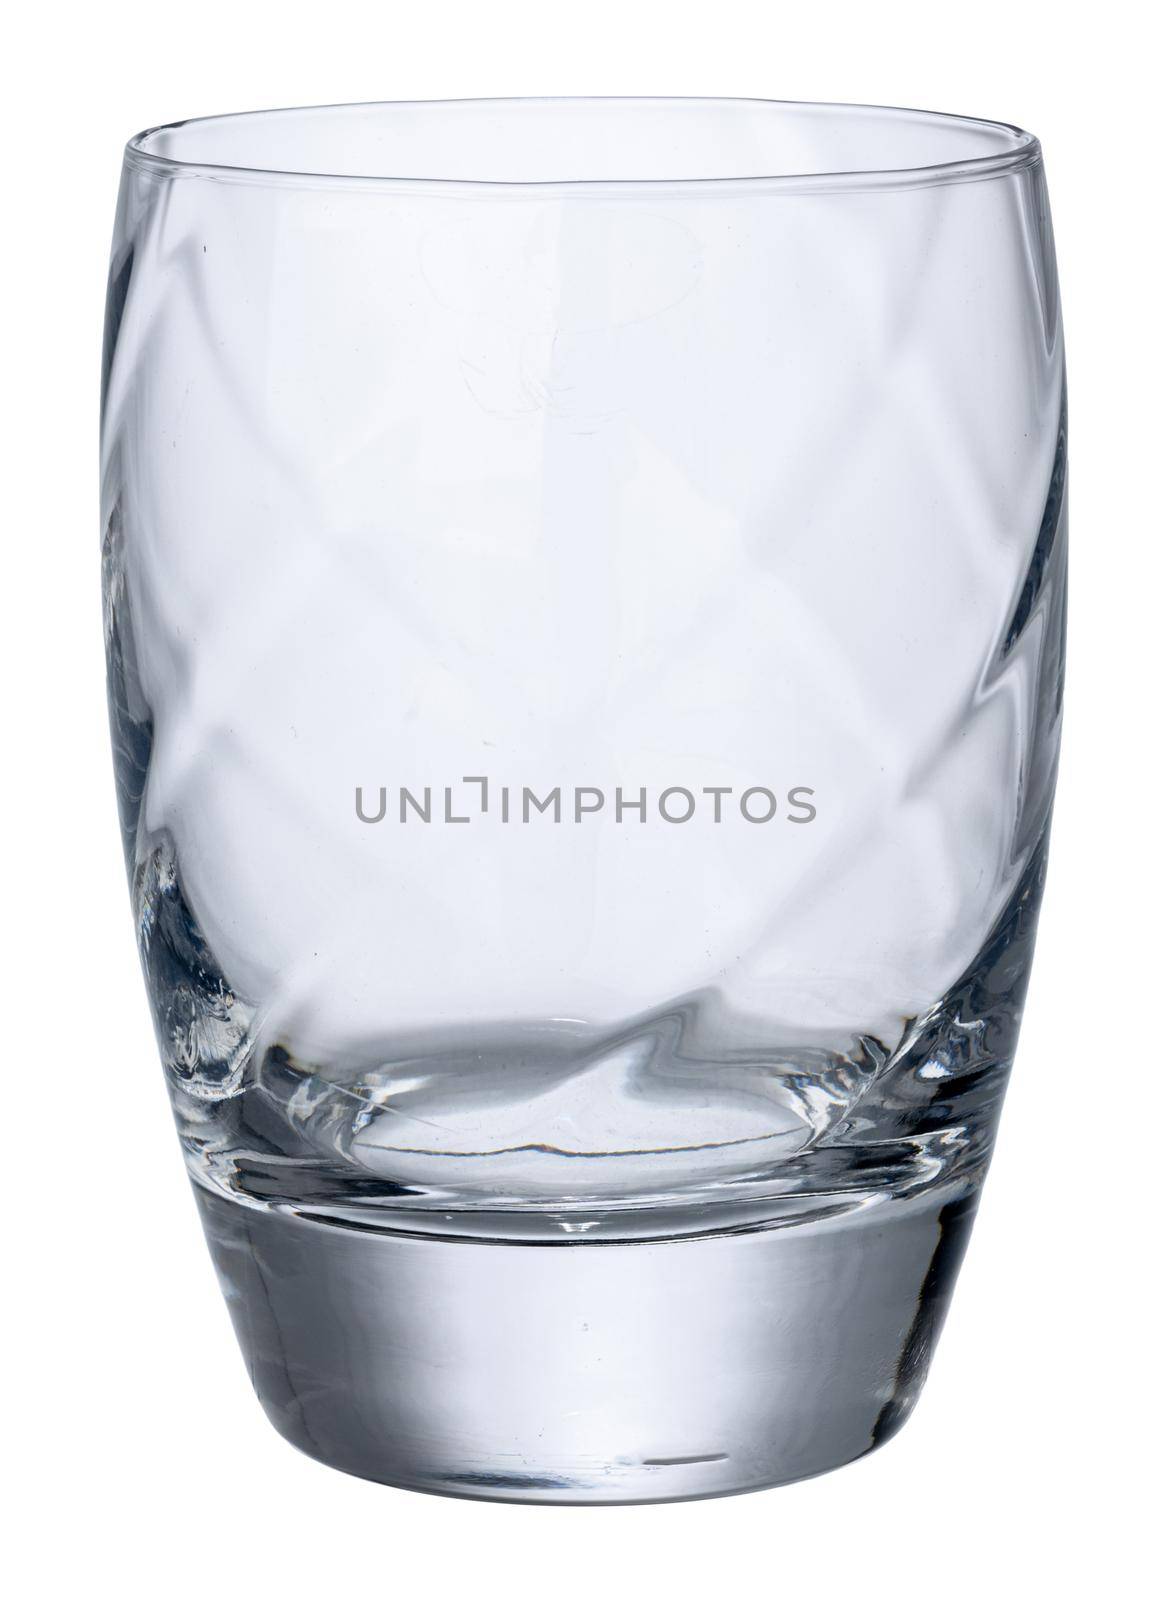 New empty glass isolated on white background close up